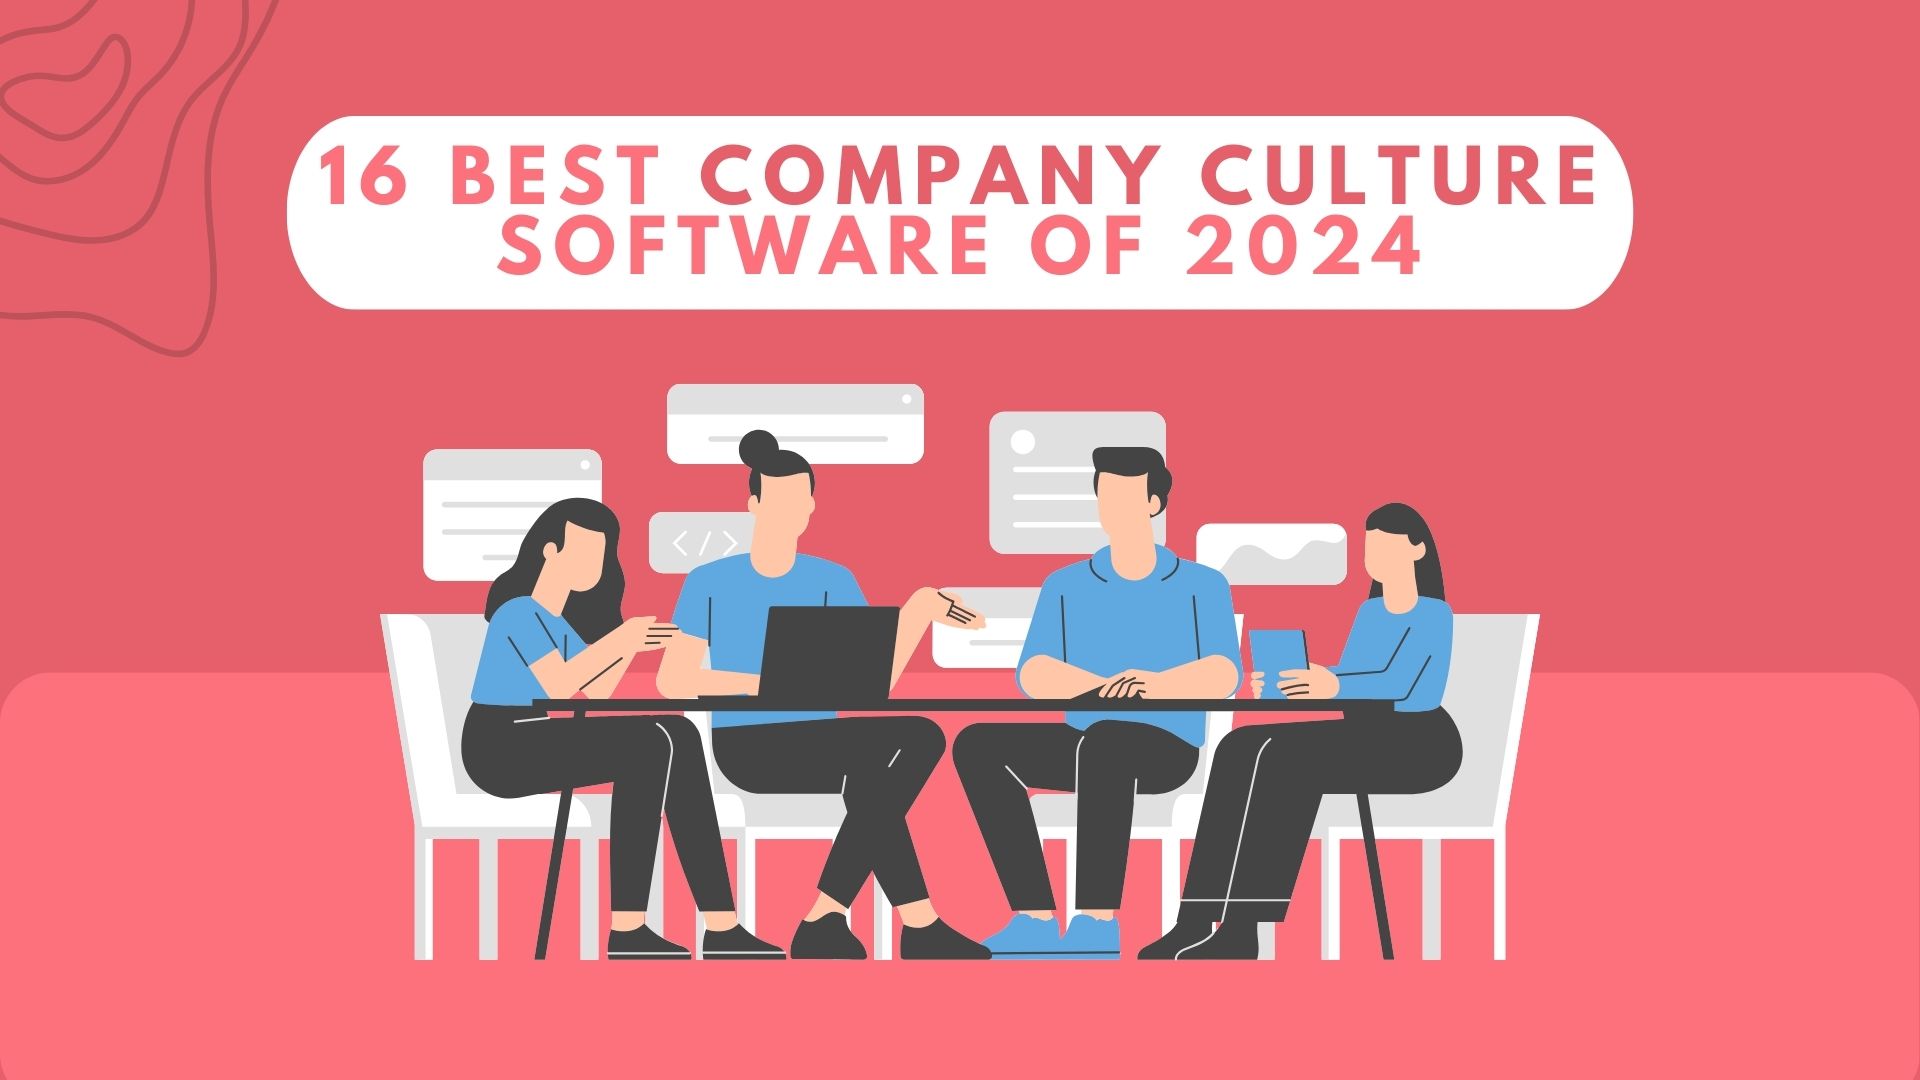 16 Best Company Culture Software in 2024